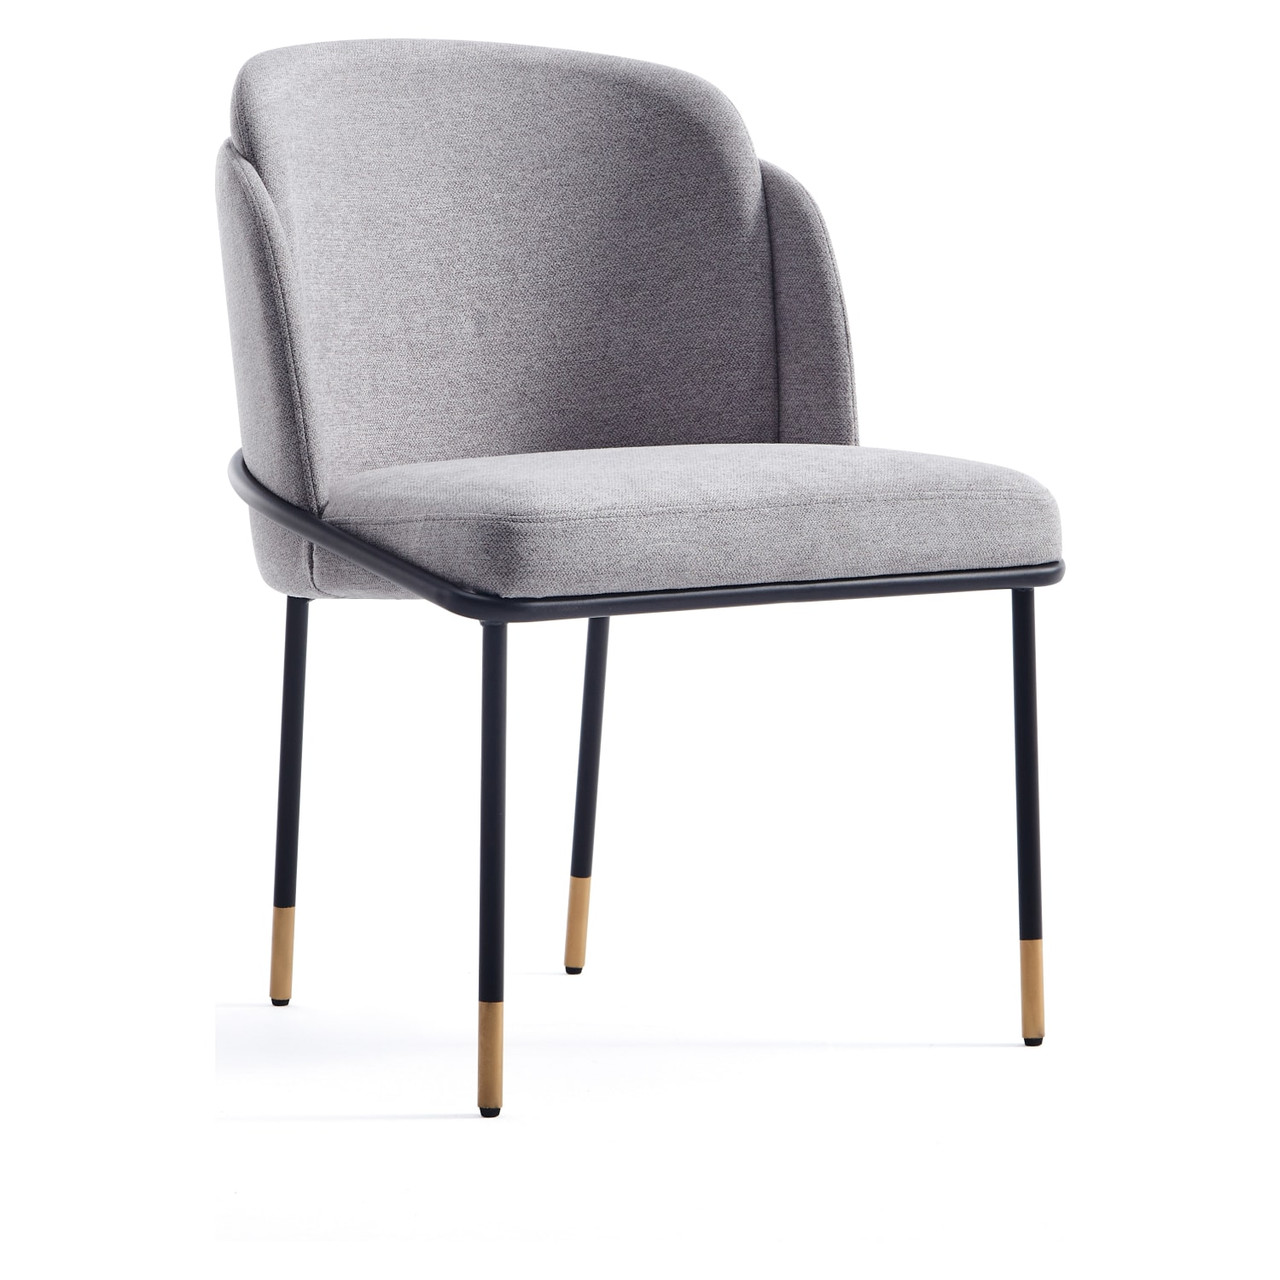 Flor Fabric Dining Chair in Gray